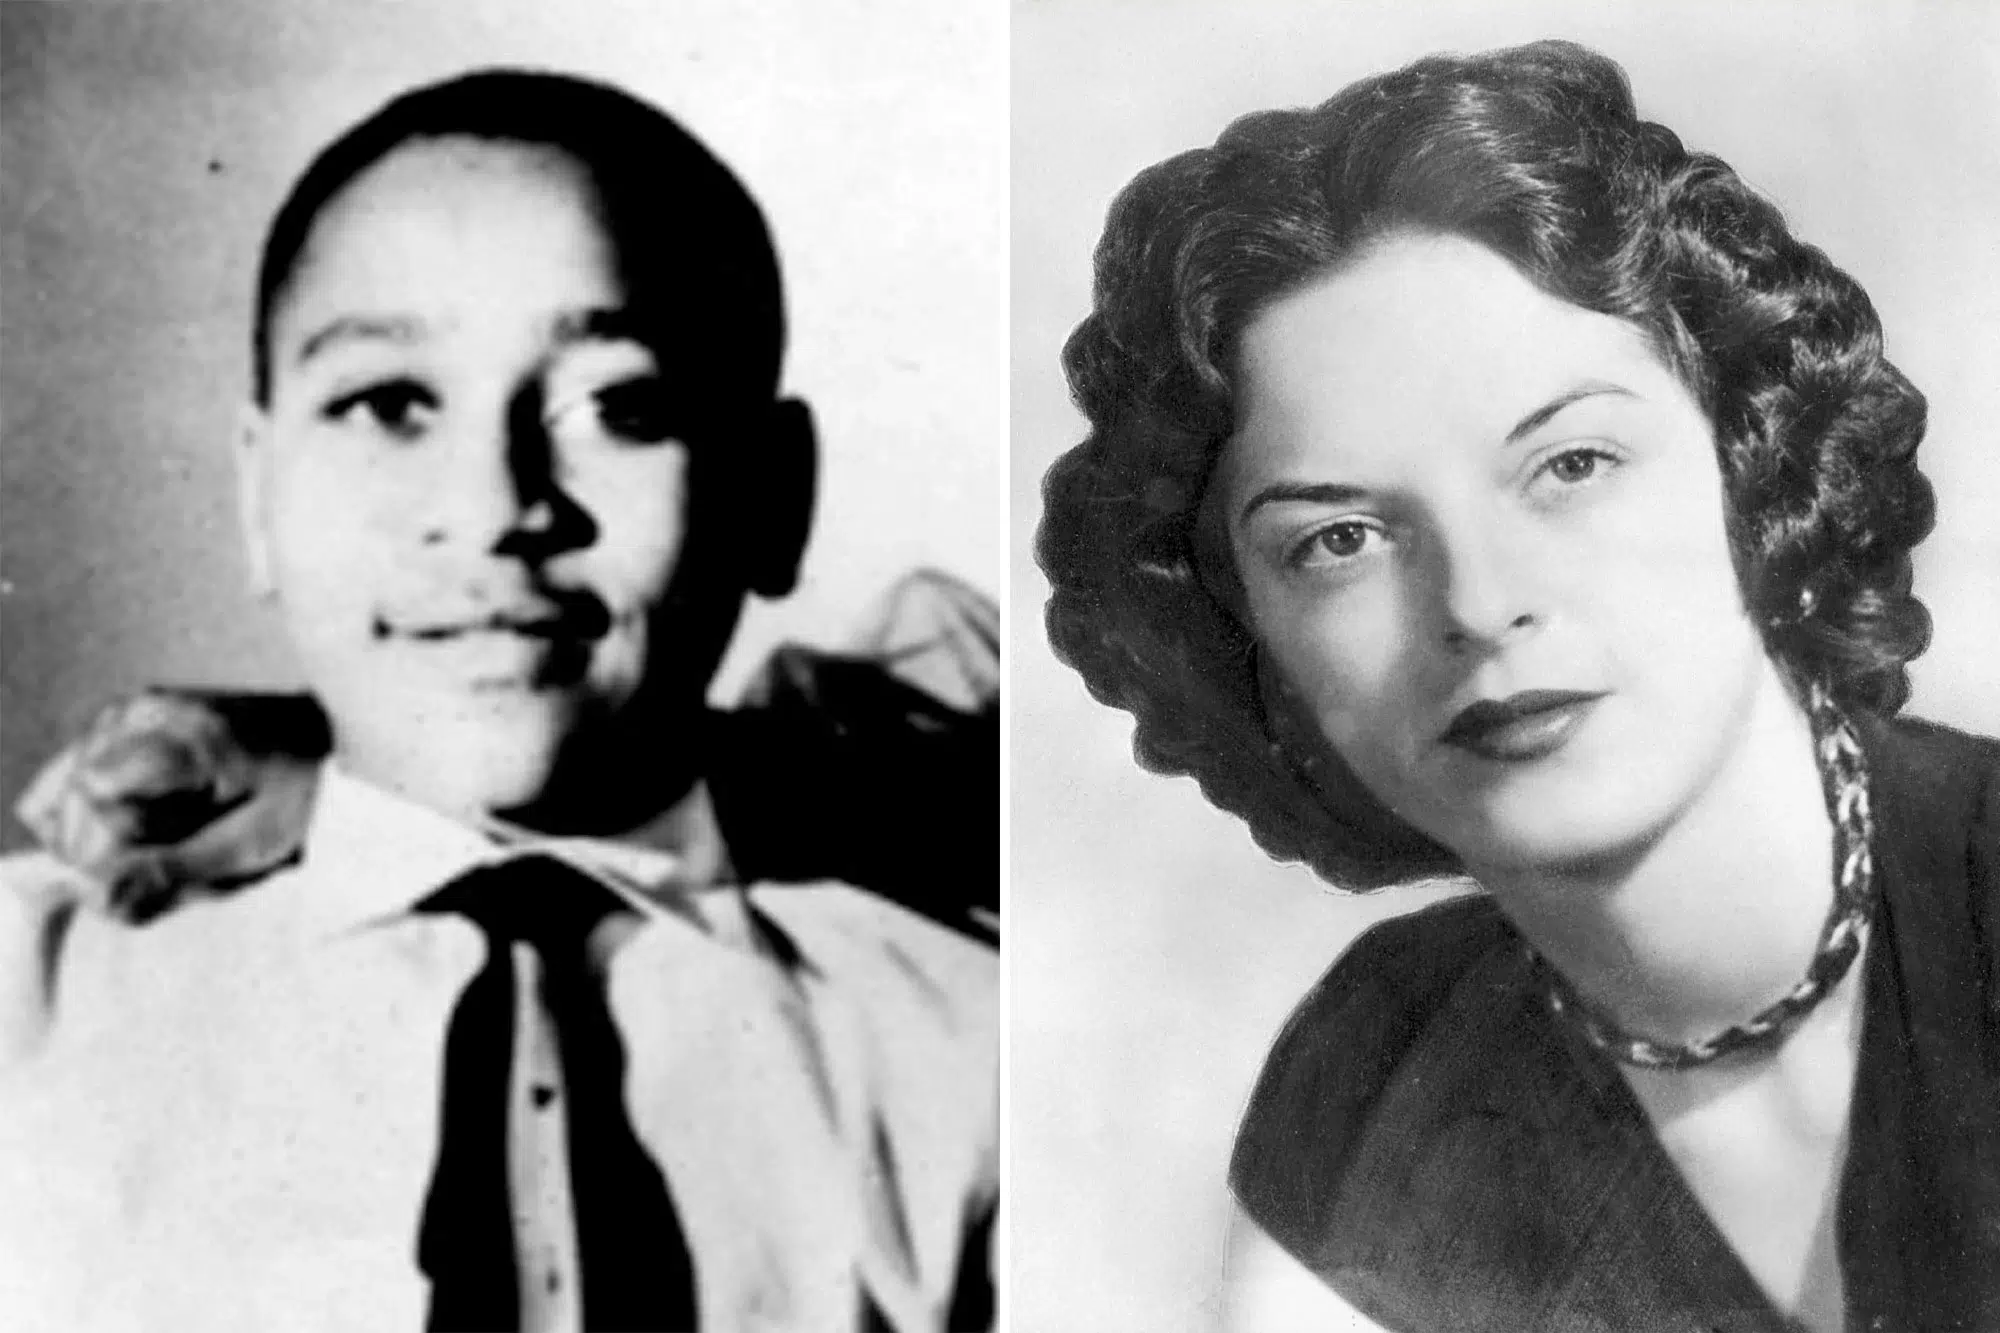 Black and white photo of young Emmett Till and his accuser Carolyn Bryant